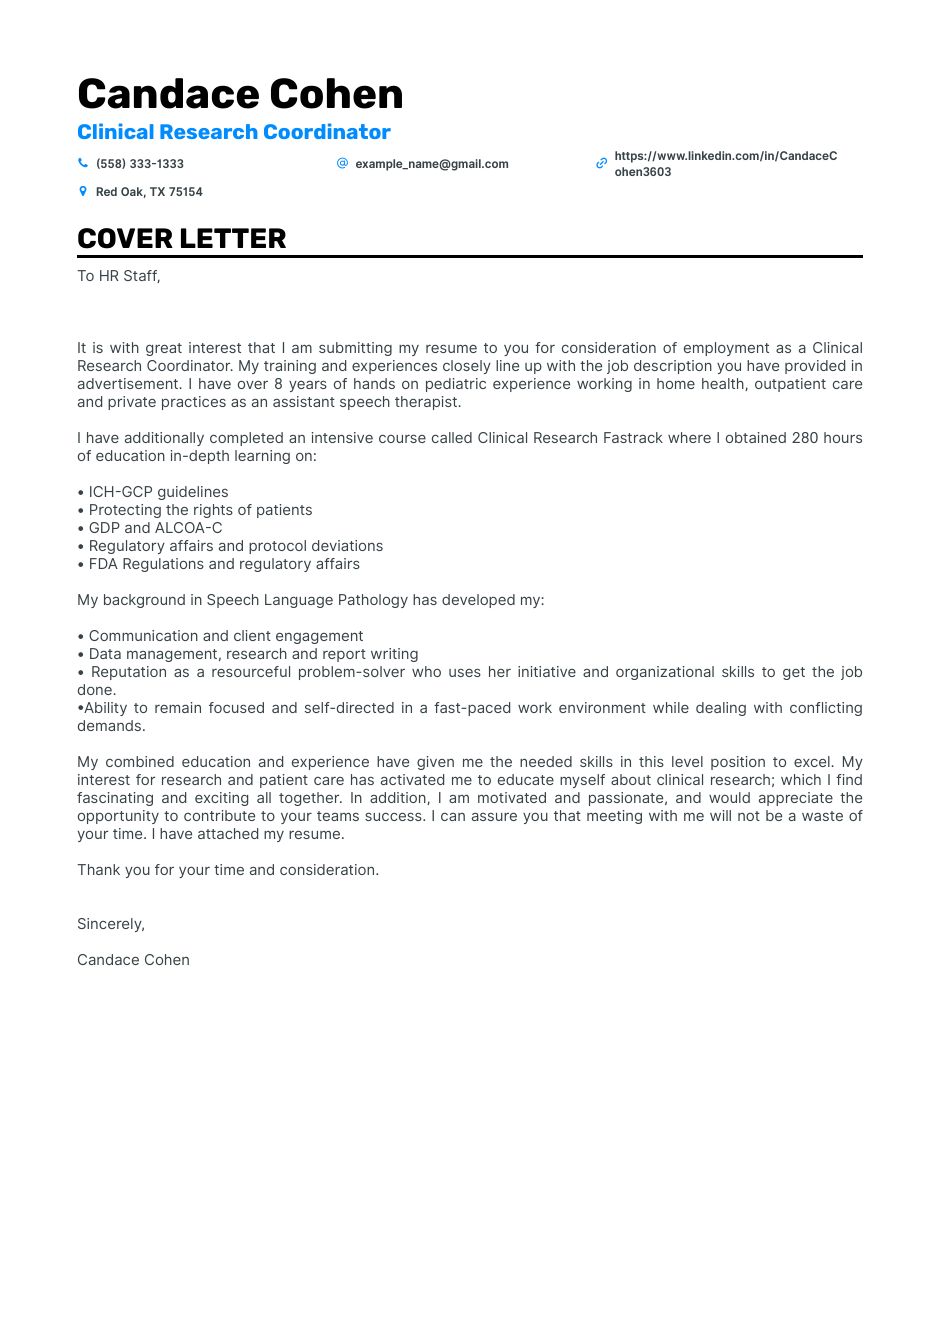 clinical research coordinator coverletter.png